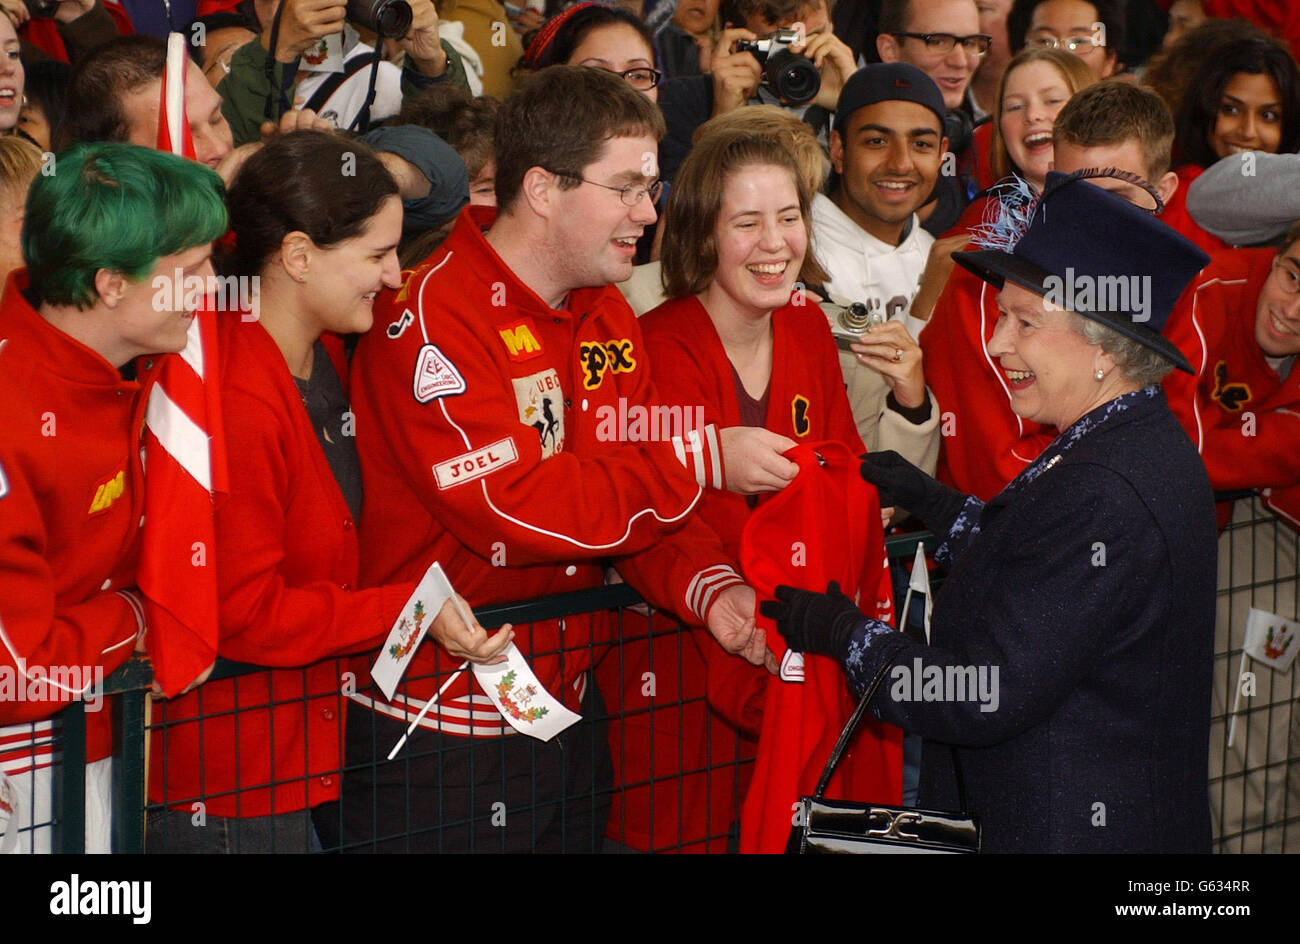 Queen Elizabeth II receives a shirt from students during a walkabout at the University of British Columbia in Canada. In a speech delivered at a lunch with prime minister Jean Chretien in Vancouver's Fairmont Hotel *...The Queen, who is on a Golden Jubilee tour of the country, praised Canada as a much respected global player, major economic force, valued Commonwealth leader and great country. See PA story ROYAL Canada. PA Photo: Kirsty Wigglesworth. Stock Photo